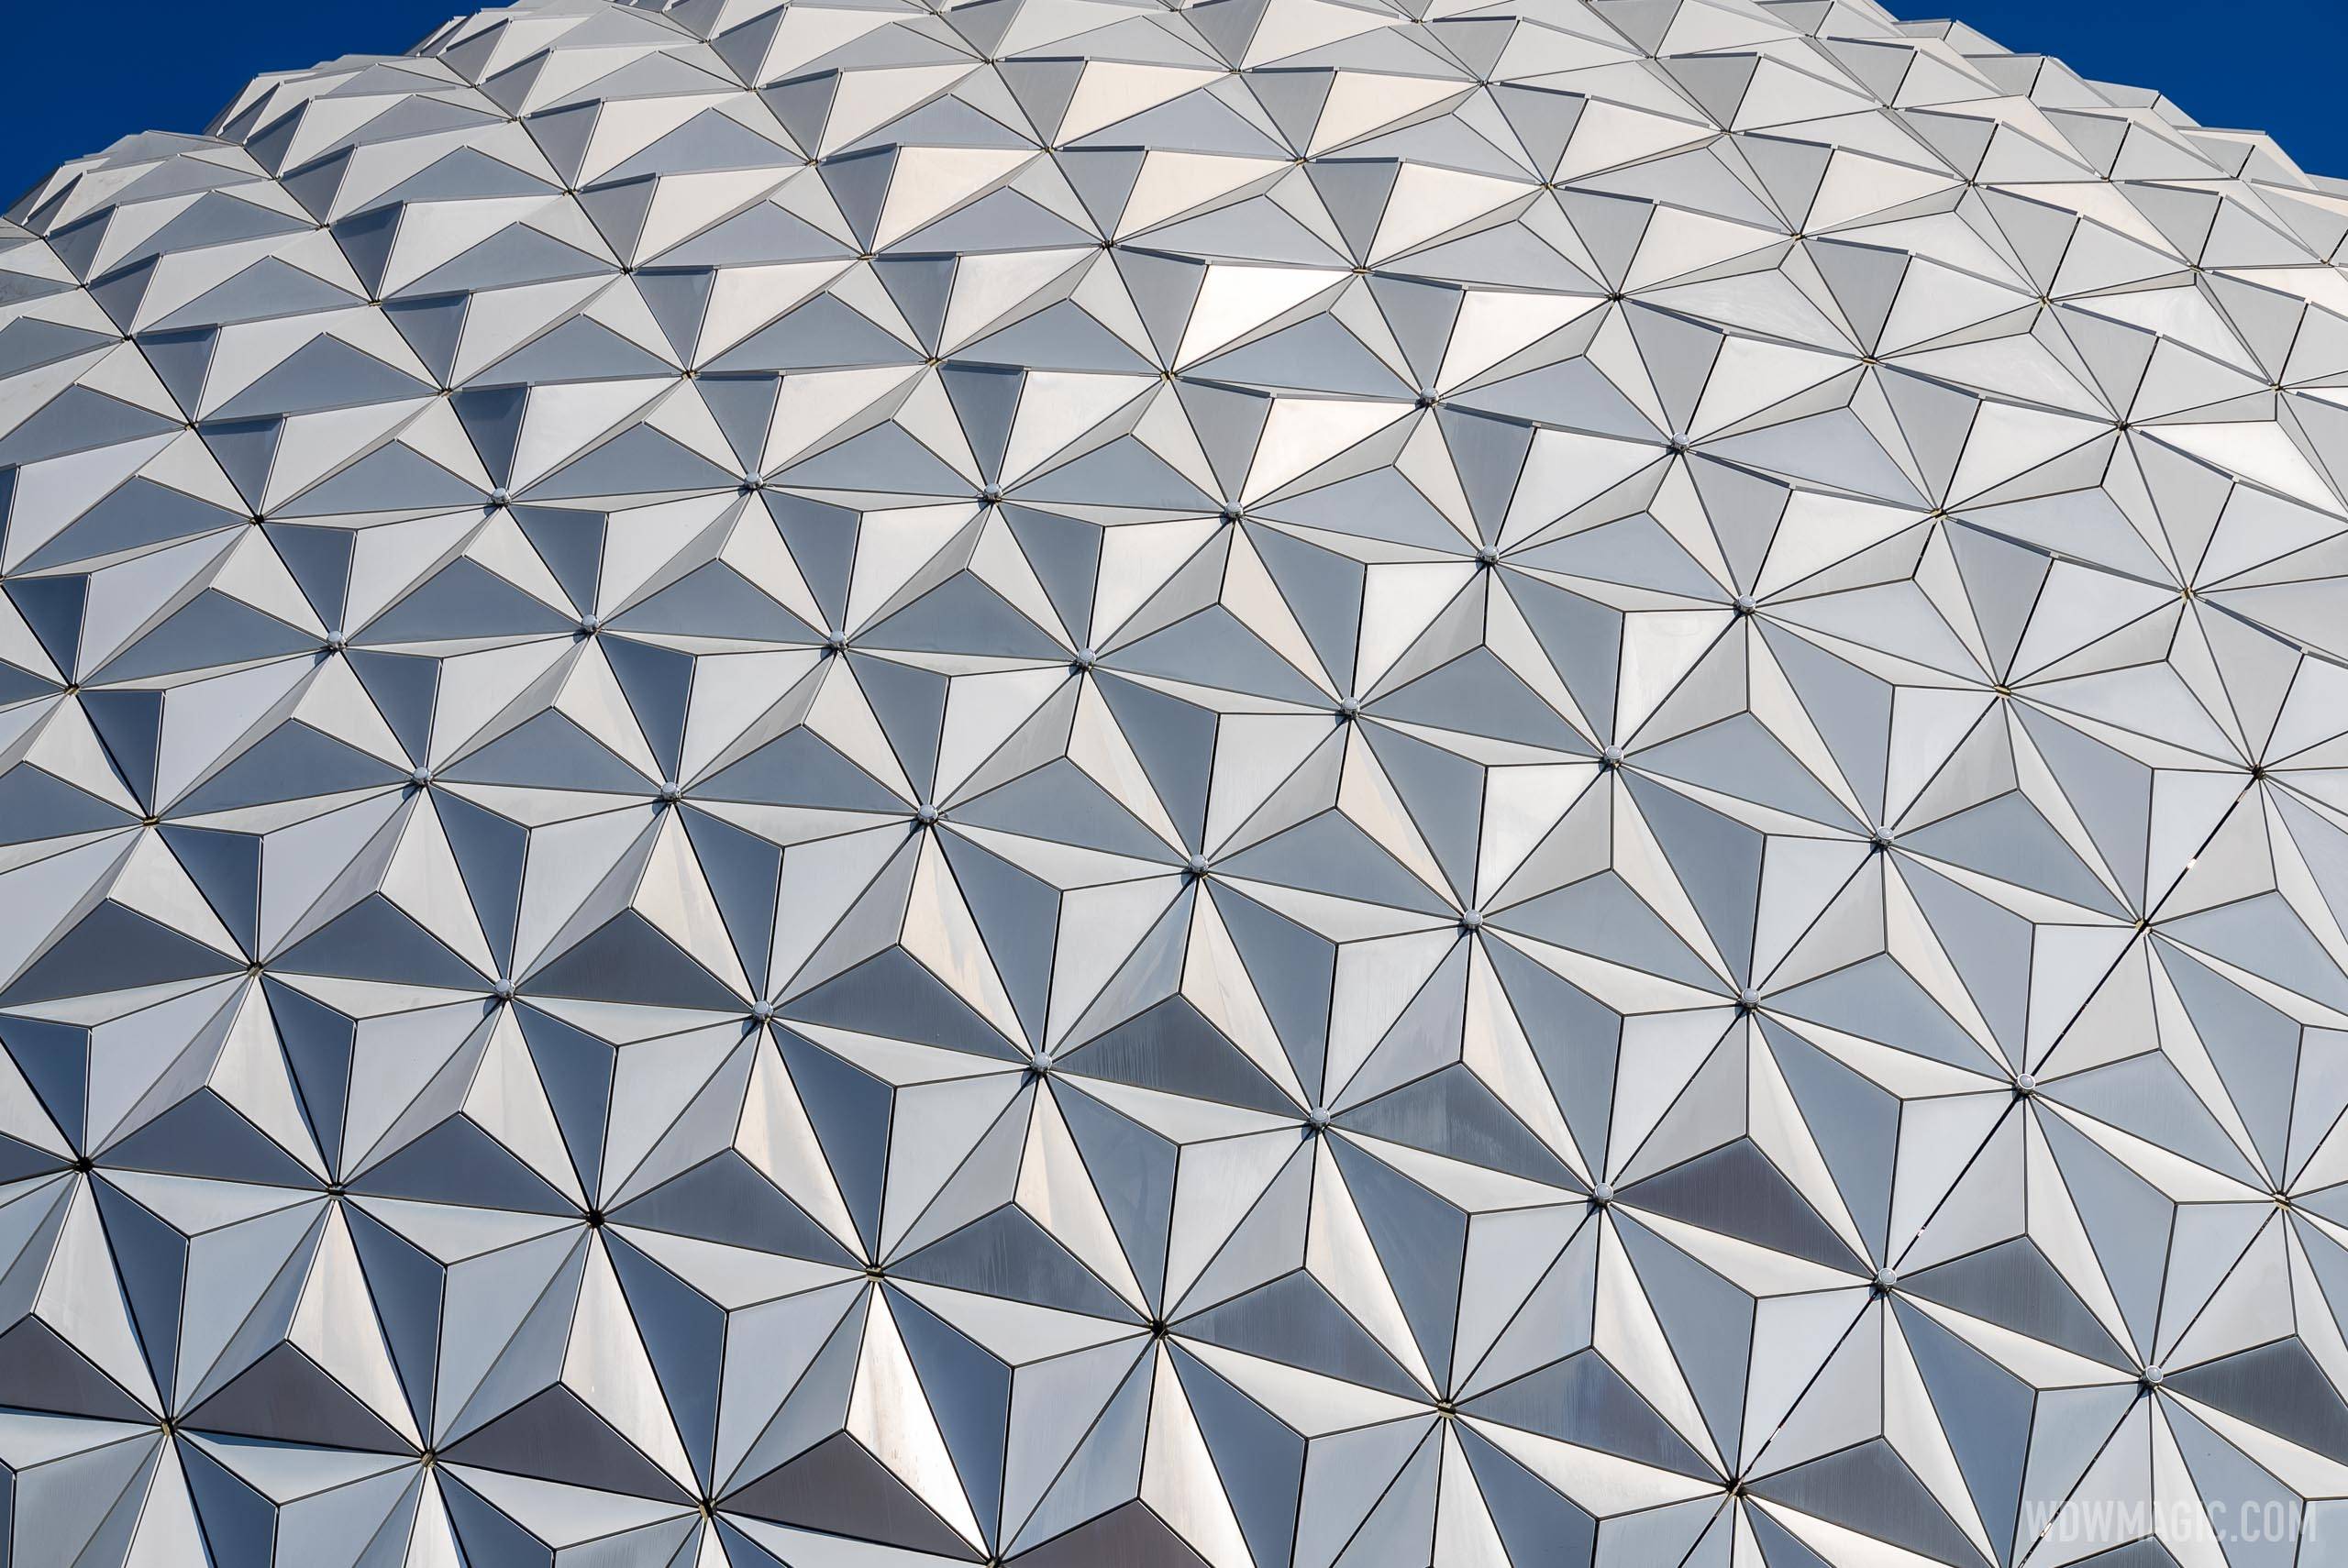 Spaceship Earth point of lights installation - April 15 2021